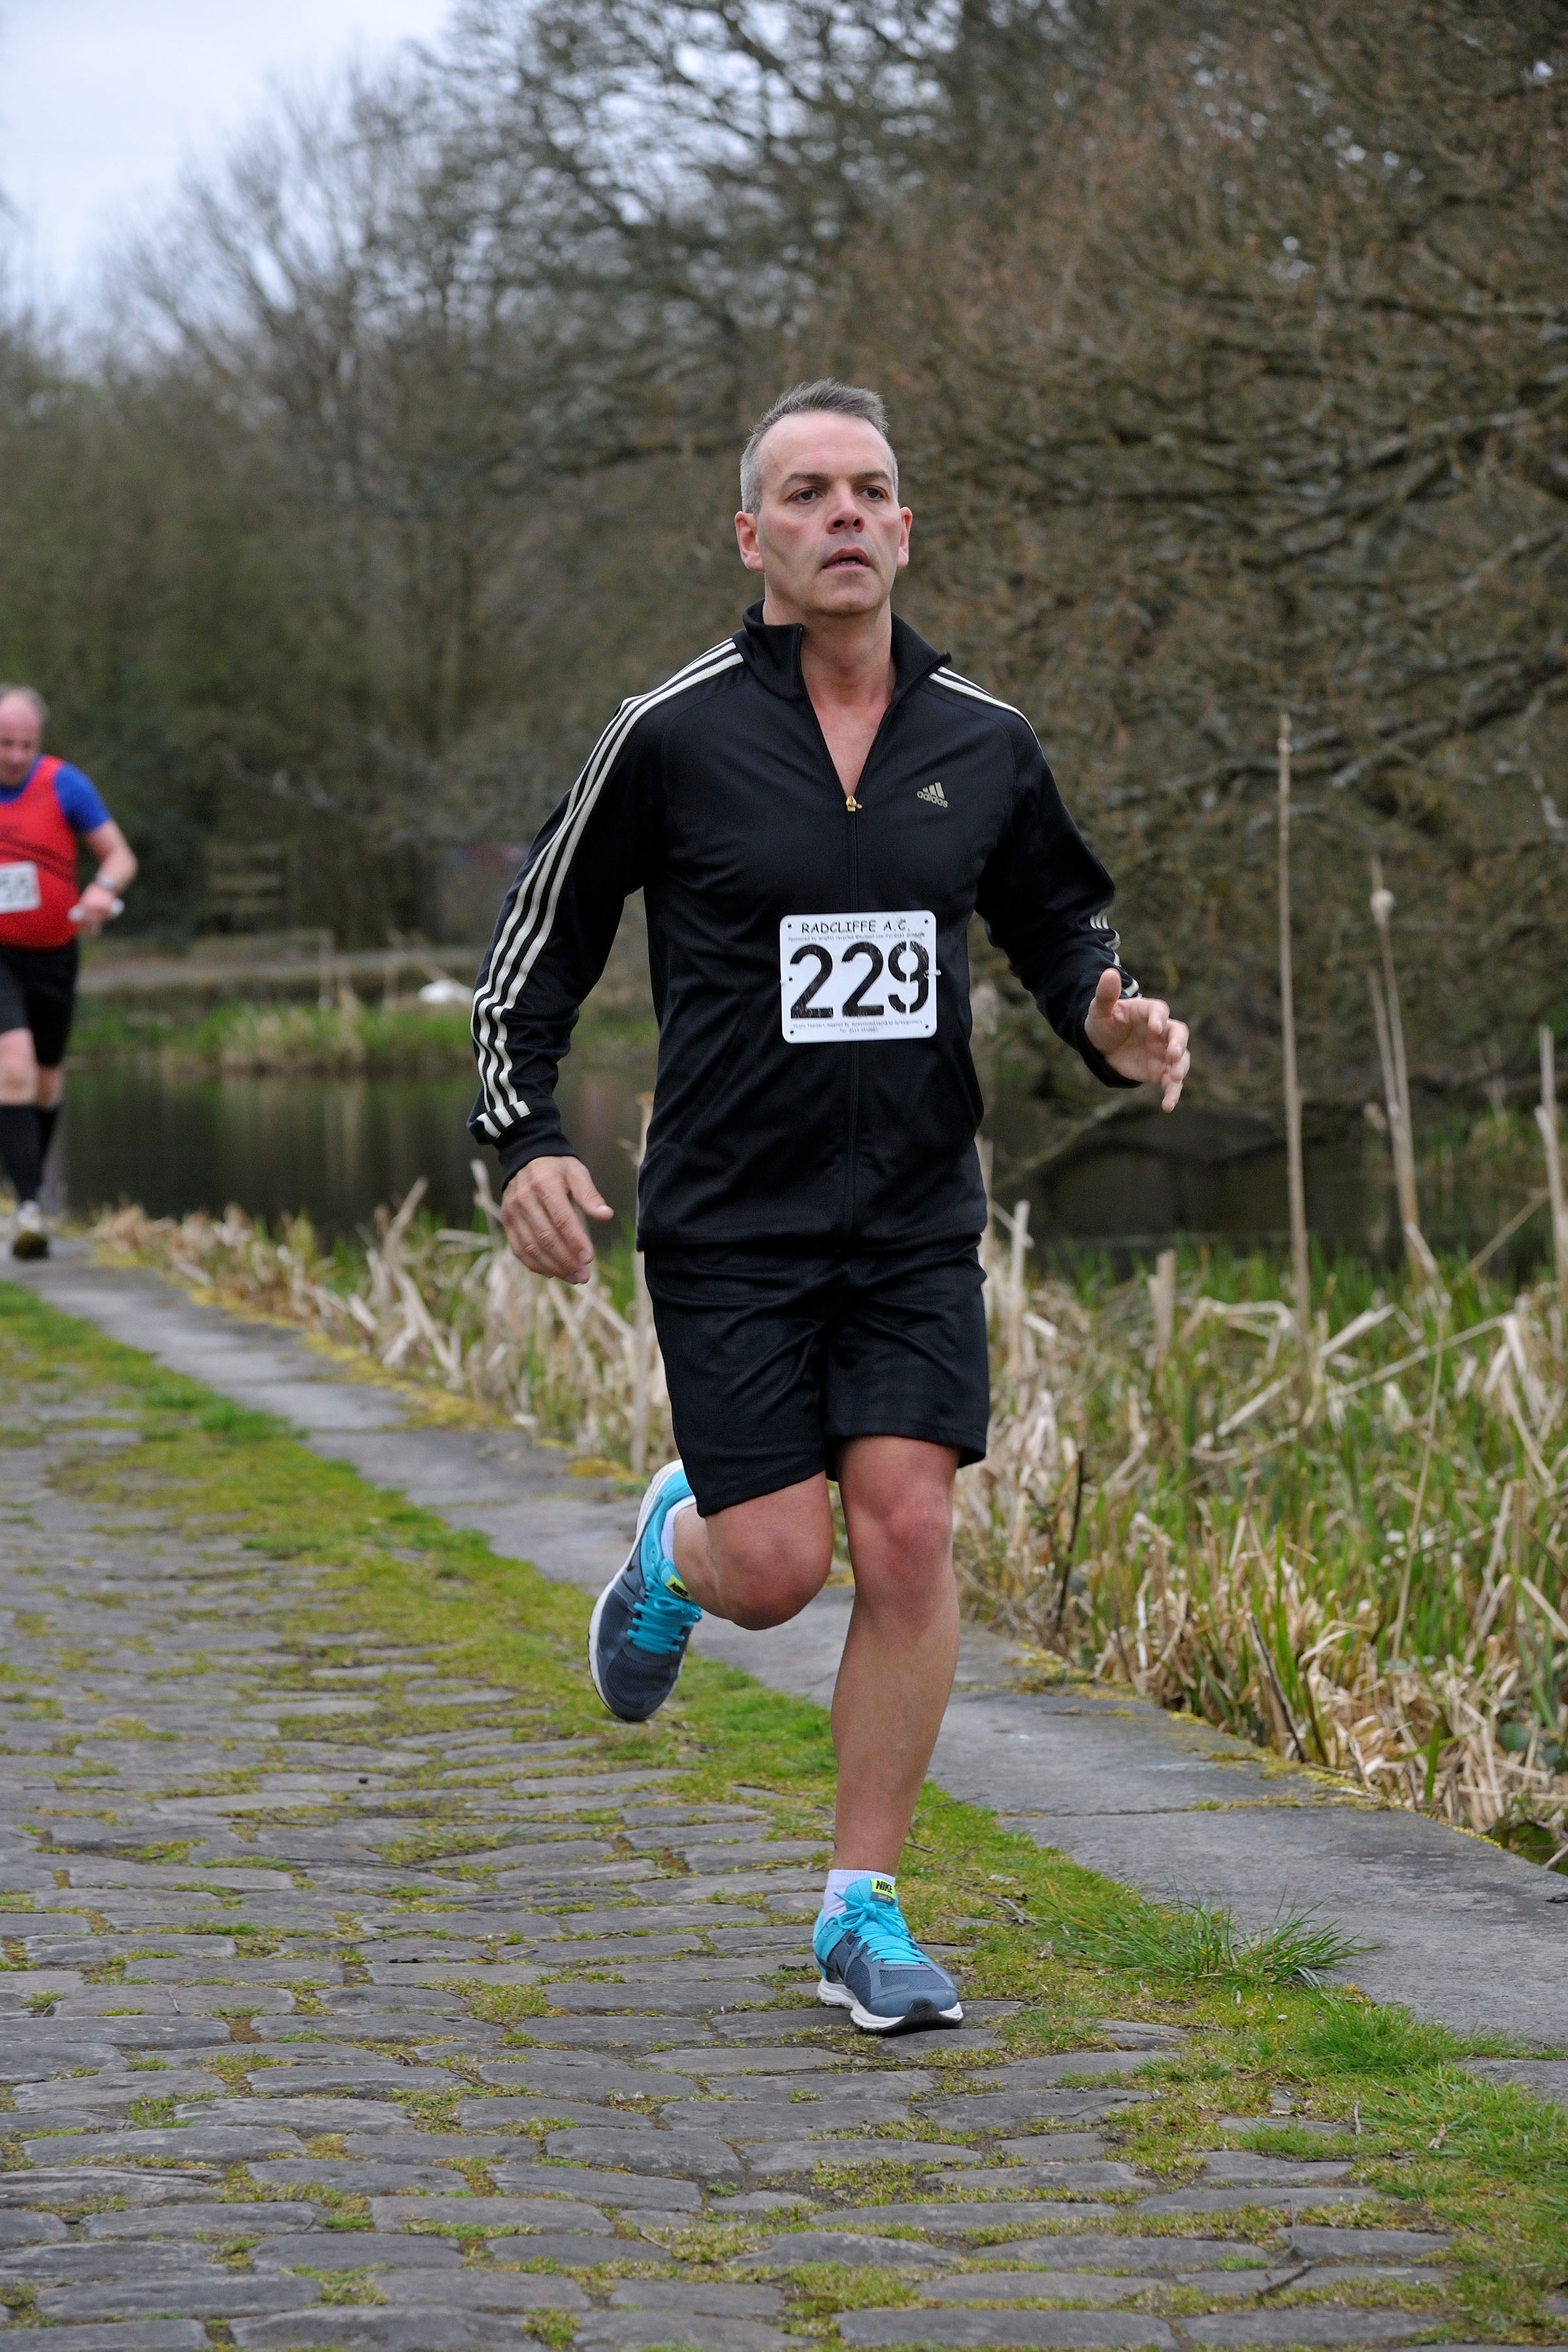 Galloping gourmet Simon takes part in Radcliffe AC 10k event.